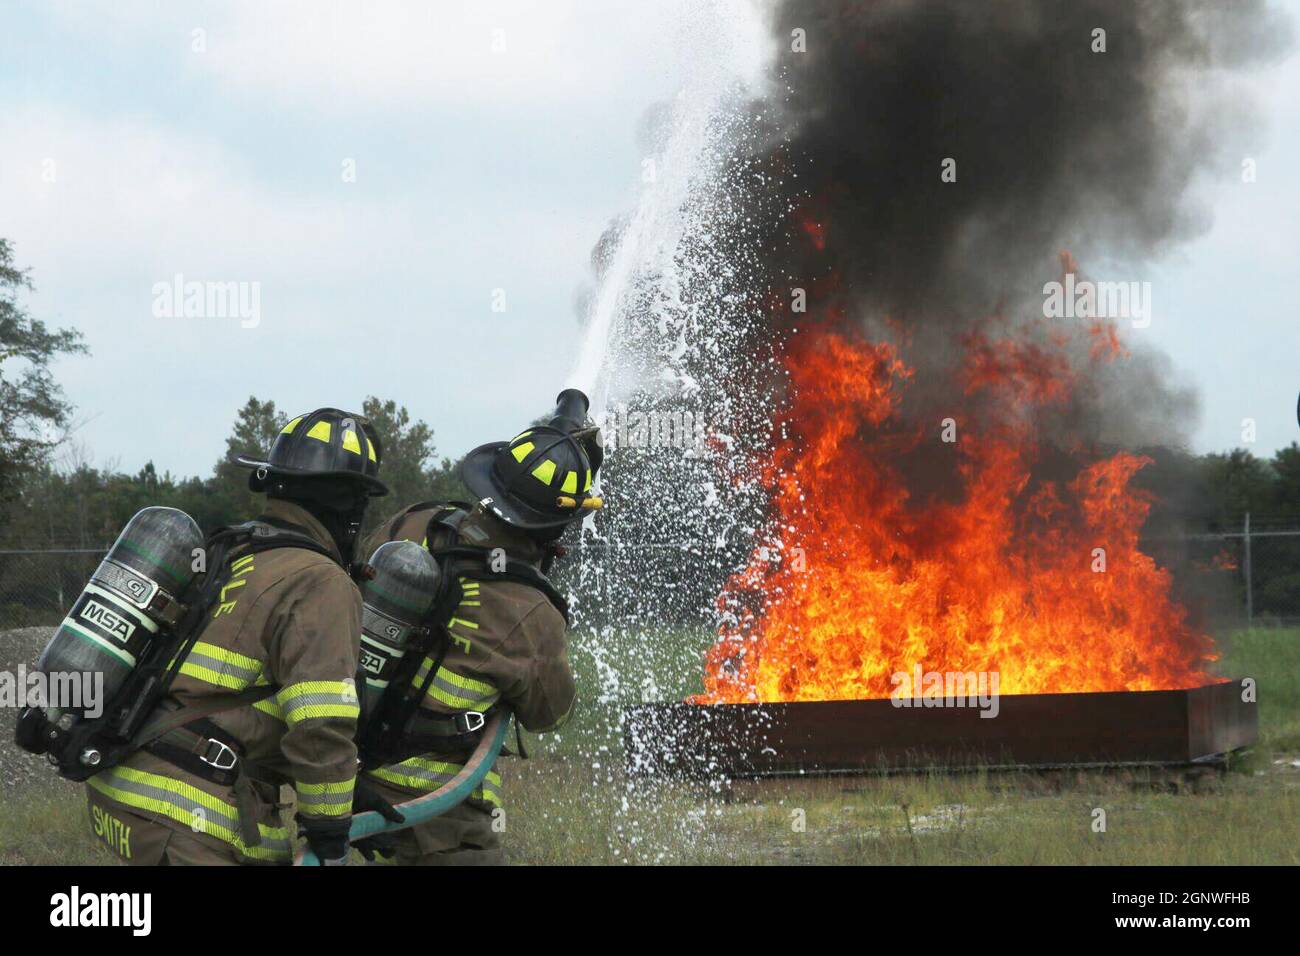 Firefighters Wilson Smith and Thomas Farst, Clarksville Fire Rescue, combat an outdoor fire Sept. 16 during Fire Fighter I and Fire Fighter II live fire practical evaluations at Fort Campbell Fire and Emergency Services’ training facility. Stock Photo